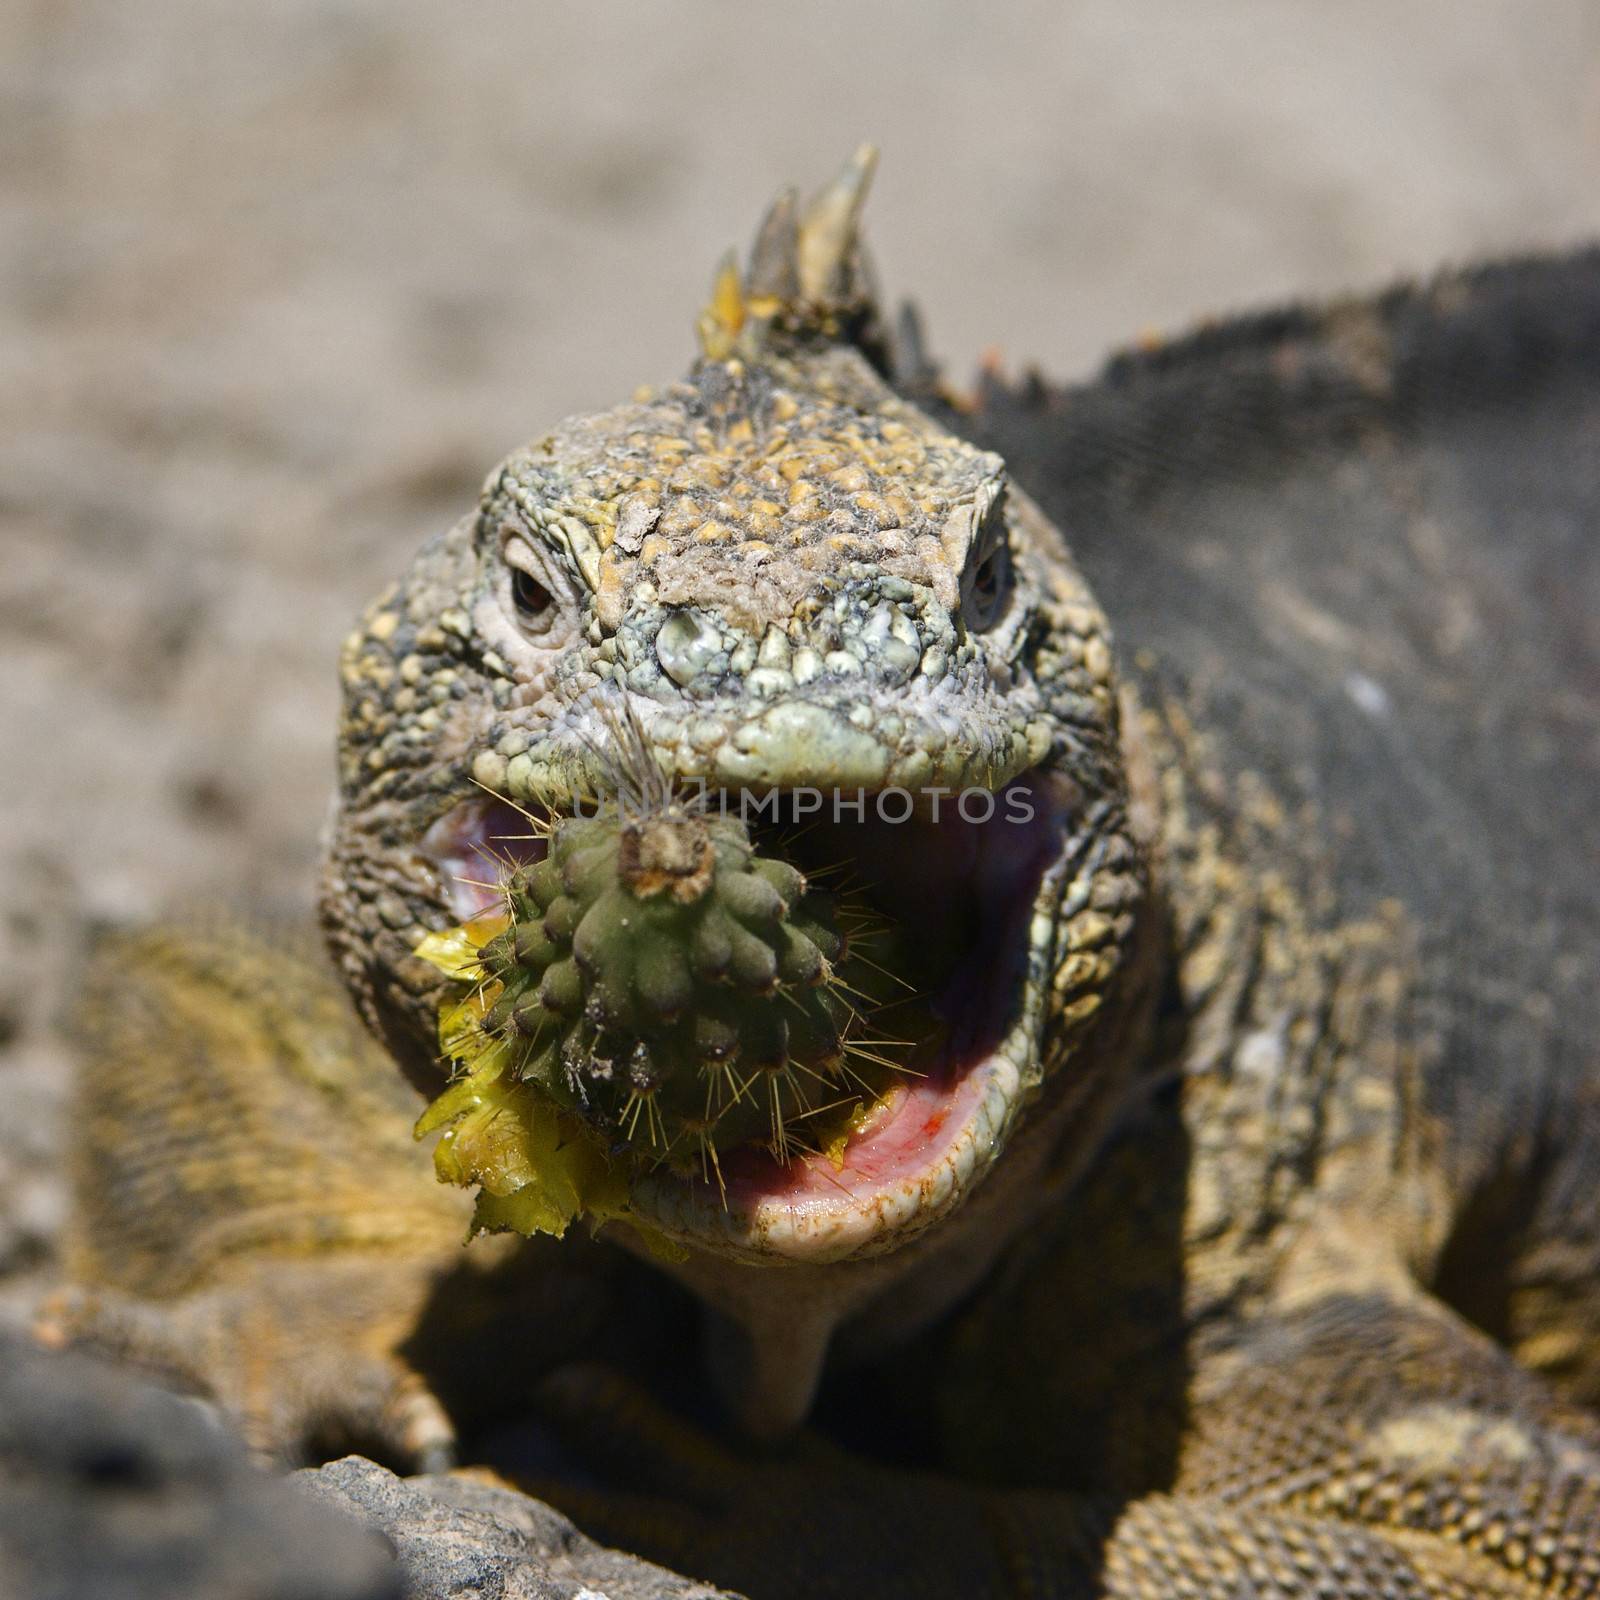 Sharp meal./ The Marine Iguana eats a prickly pear. The Marine Iguana (Amblyrhynchus cristatus) is an iguana found only on the Galapagos Islands. 